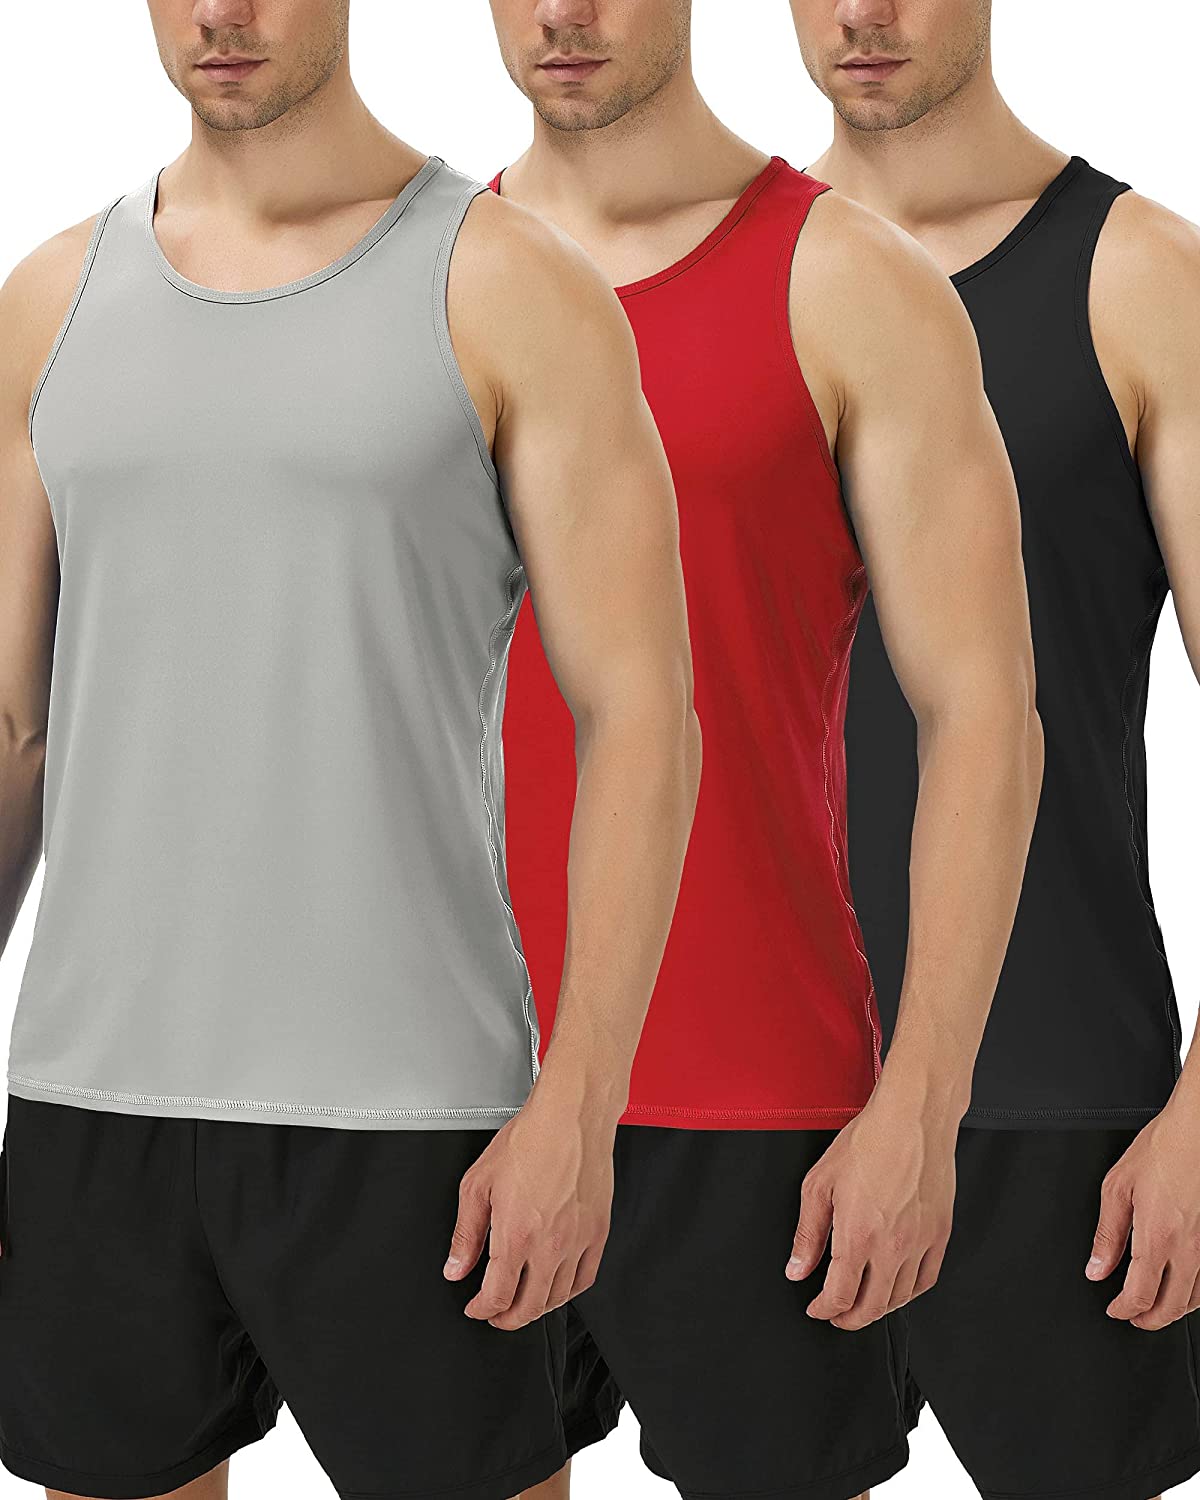 YOMOVER Tank Tops for Men Pack Quick Dry Workout Athletic Sleeveless Mens Shirts 